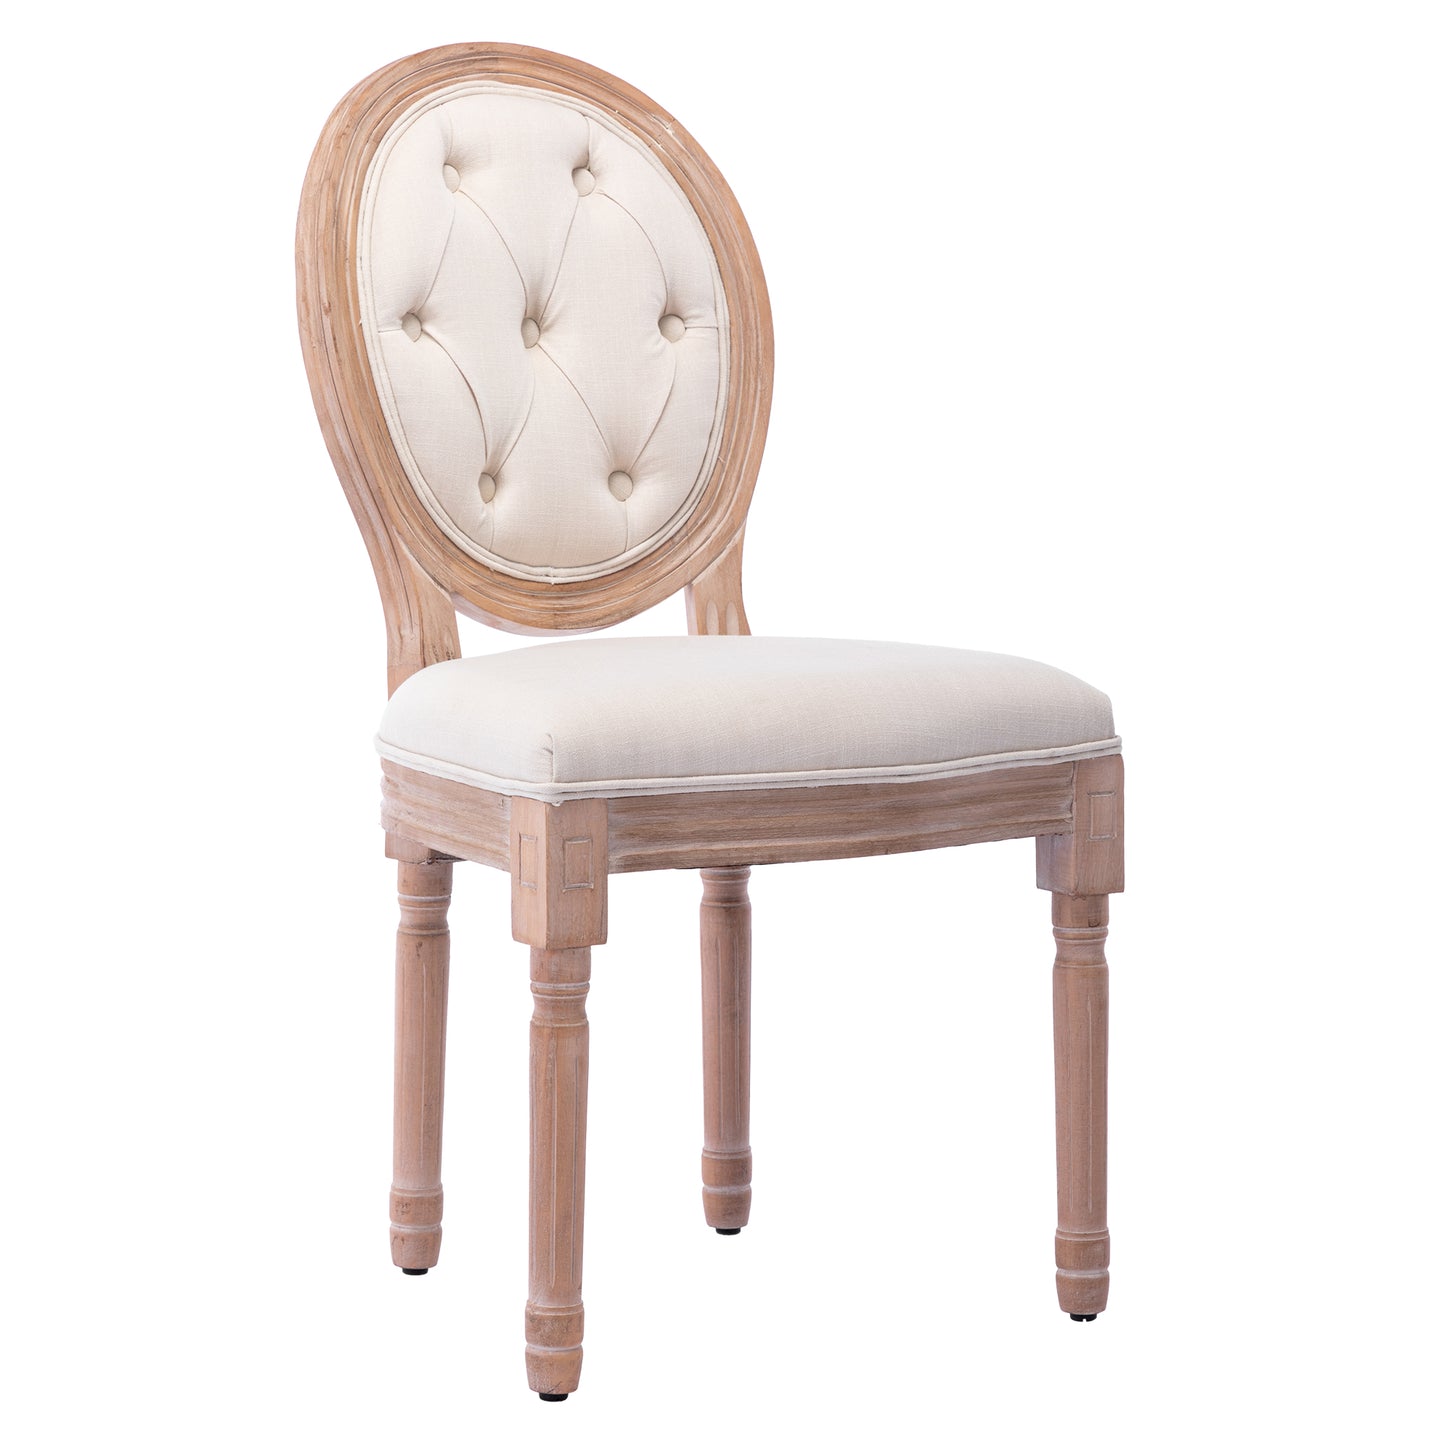 SogesPower Upholstered Fabrice French Dining Chair with rubber legs,Set of 2- Beige+Fabric